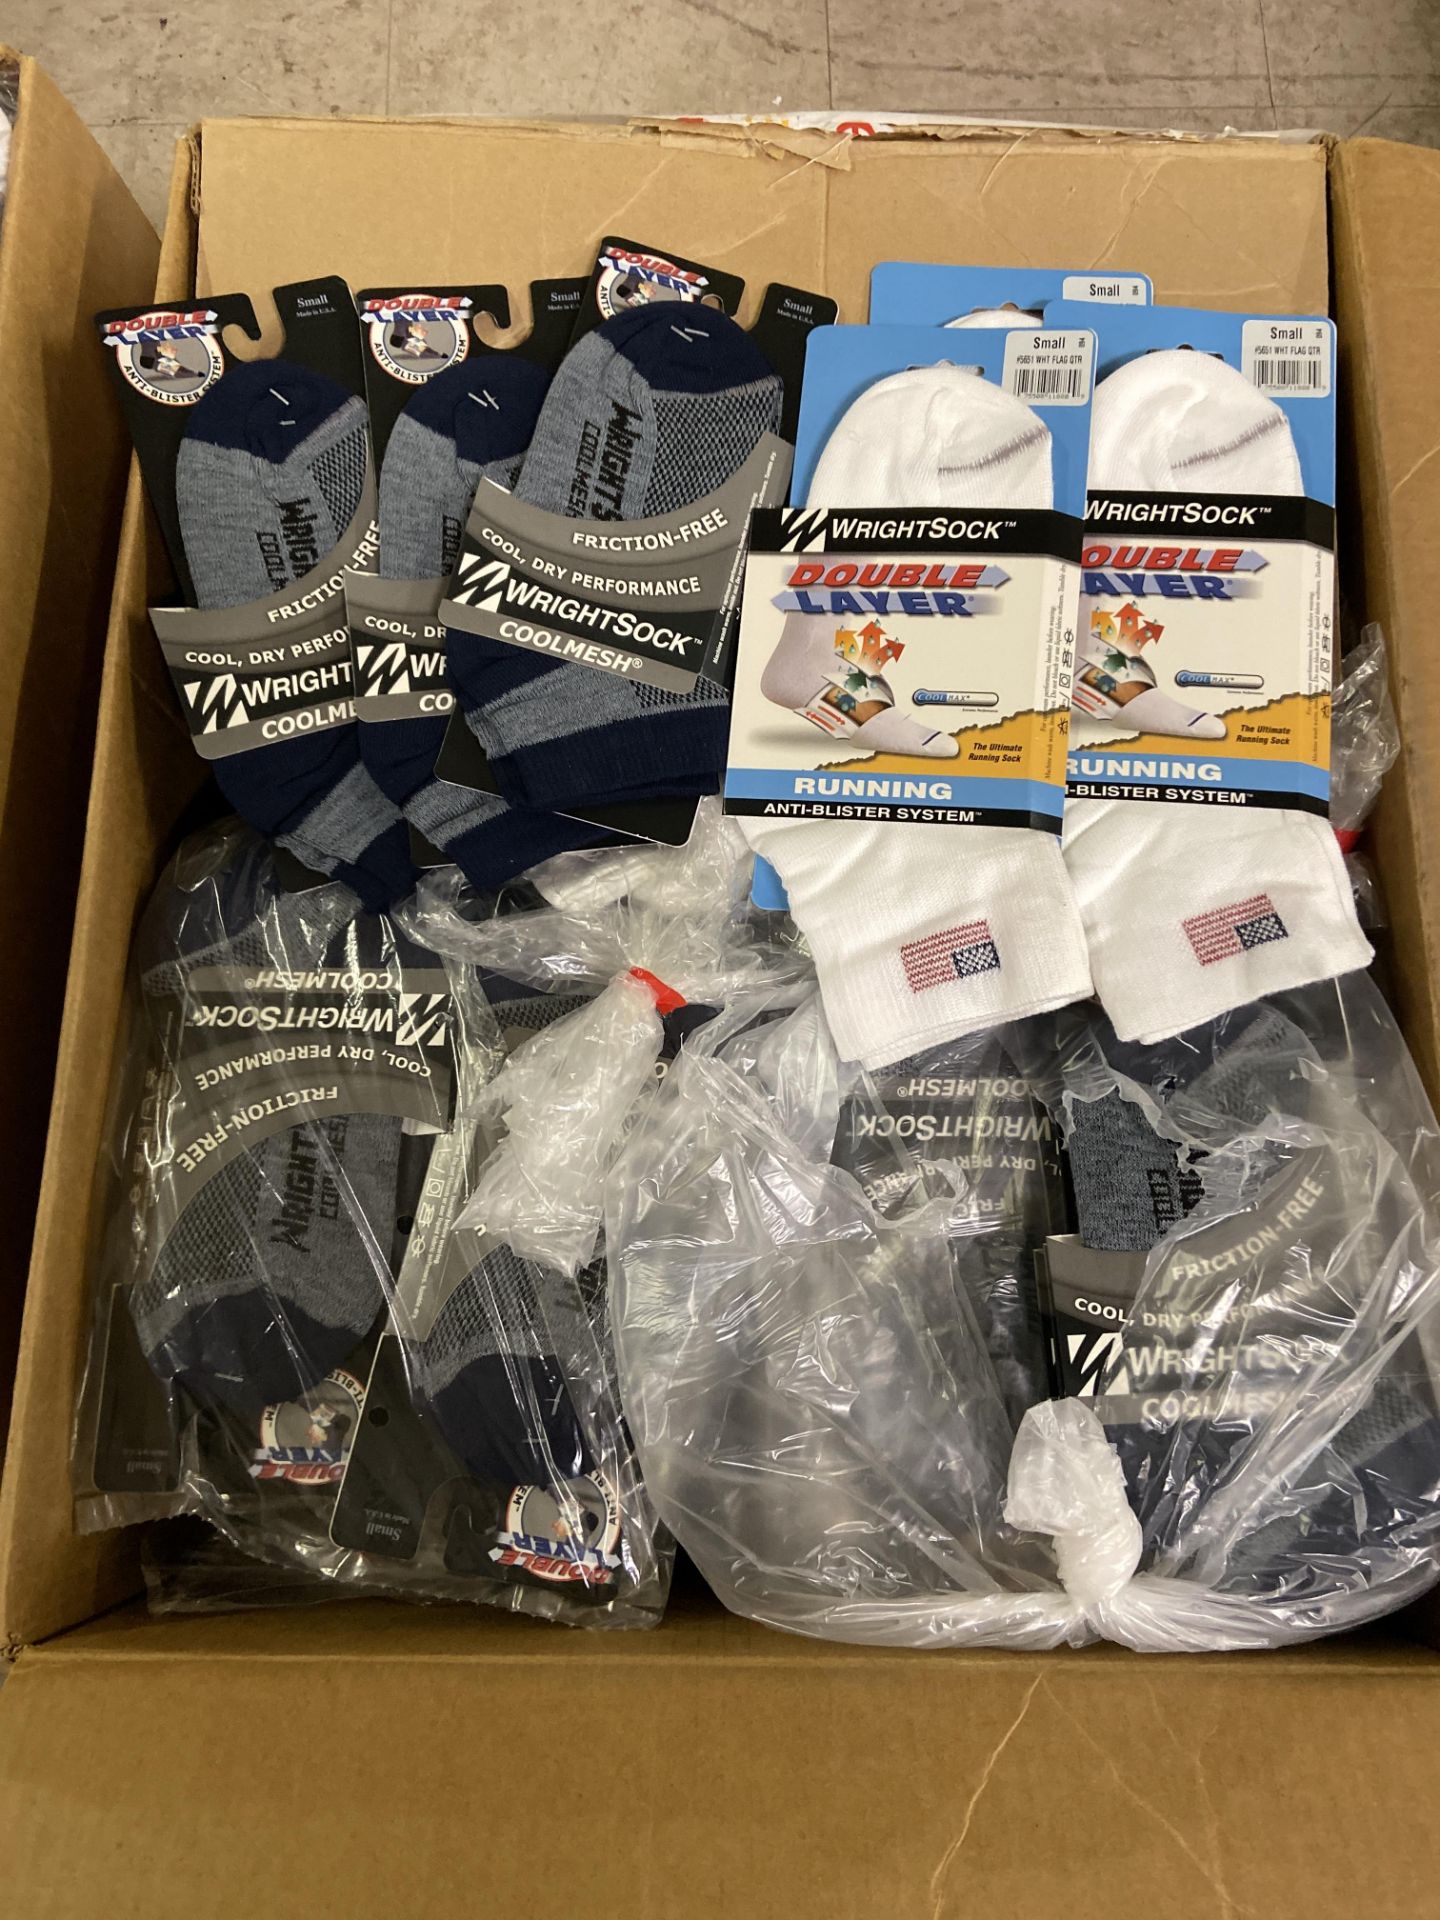 250+ packs of New Socks, Wrightsock Running and Coolmesh, Double Layer, Various Colors Lot is